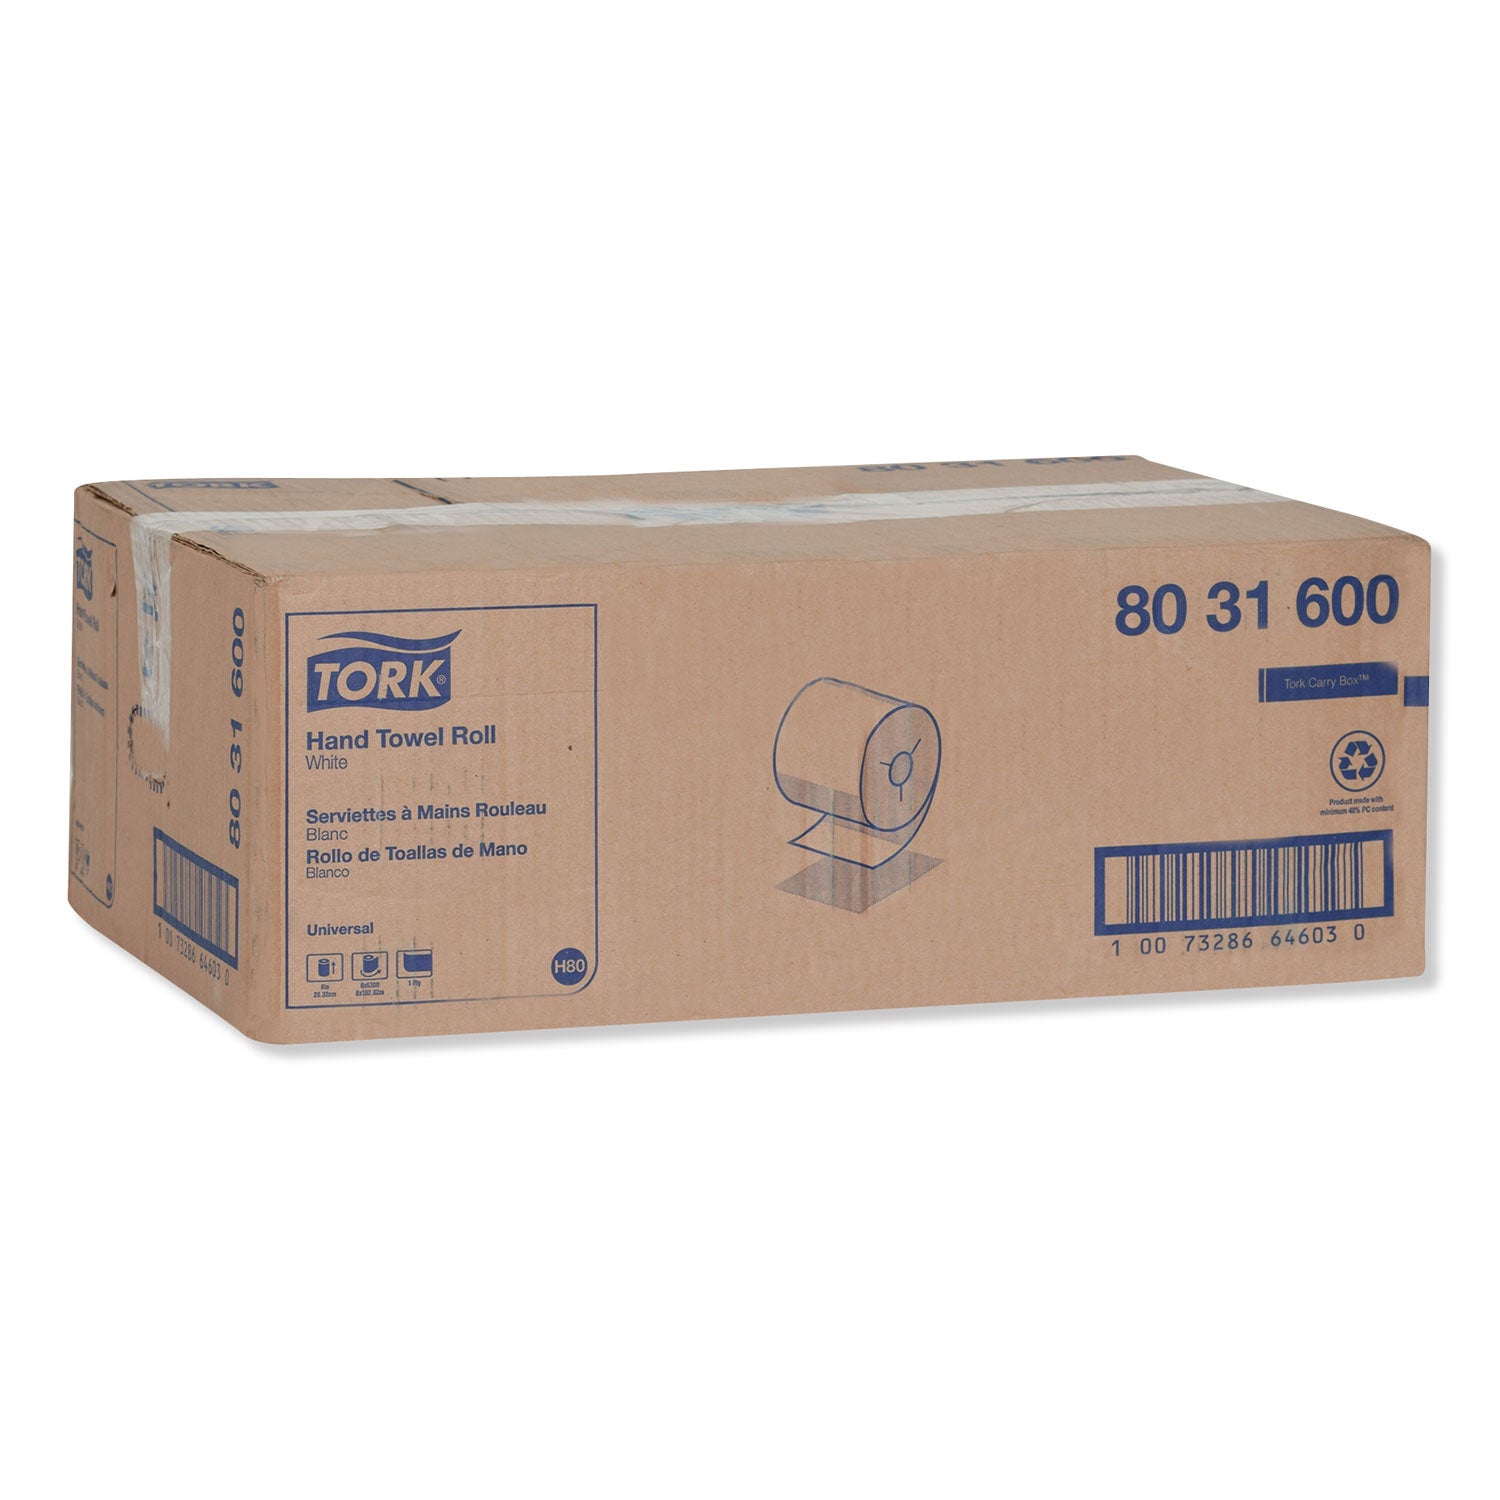 universal-hand-towel-roll-notched-1-ply-75-x-630-ft-white-6-rolls-carton_trk8031600 - 2